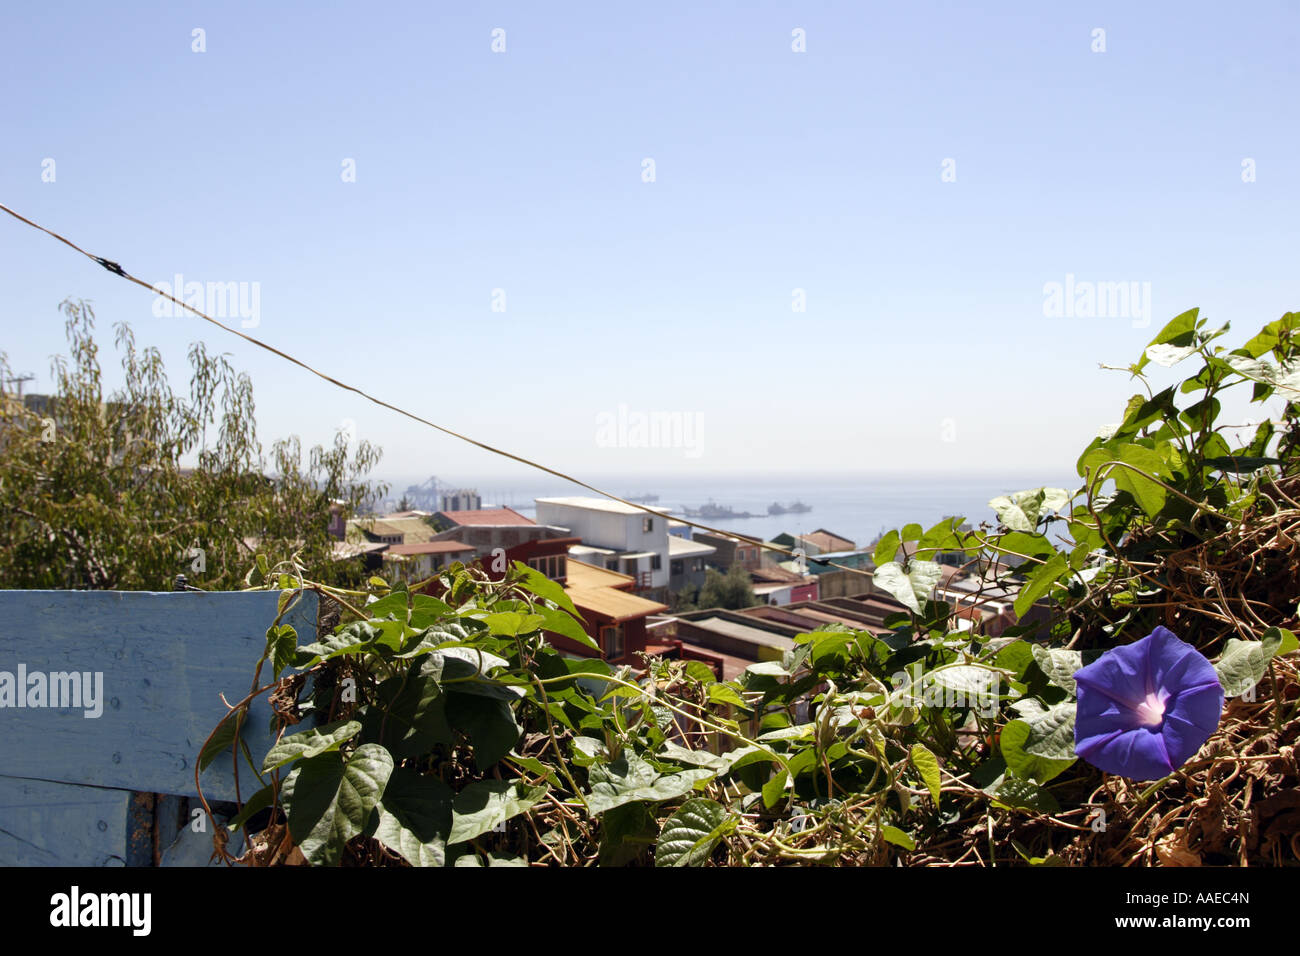 Blue Ipomea flower and Pacific ocean view in Valparaiso, Chile. Stock Photo